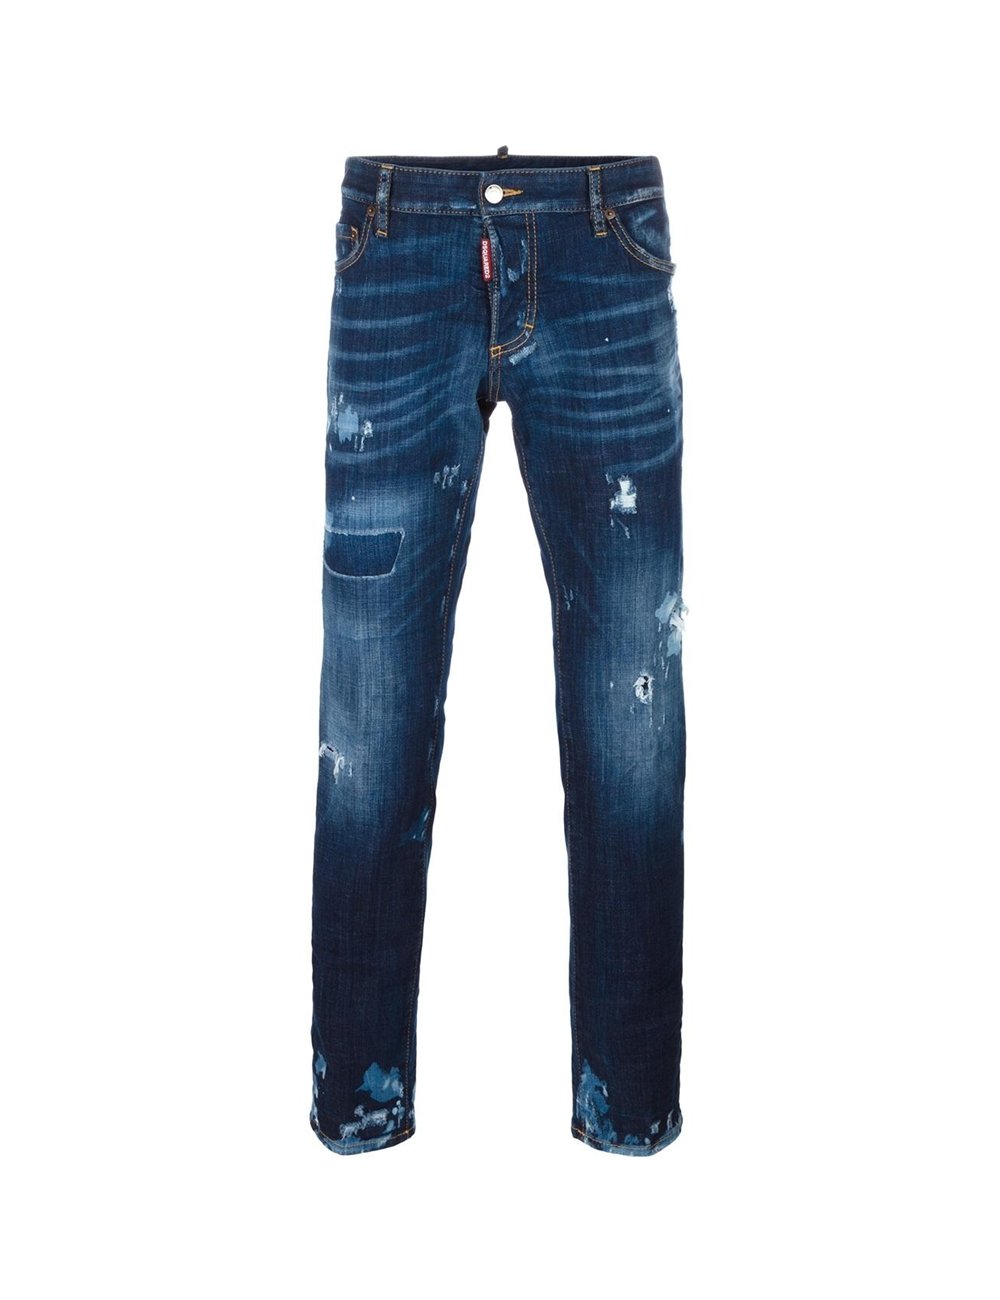 jeans dsquared2 homme galerie lafayette